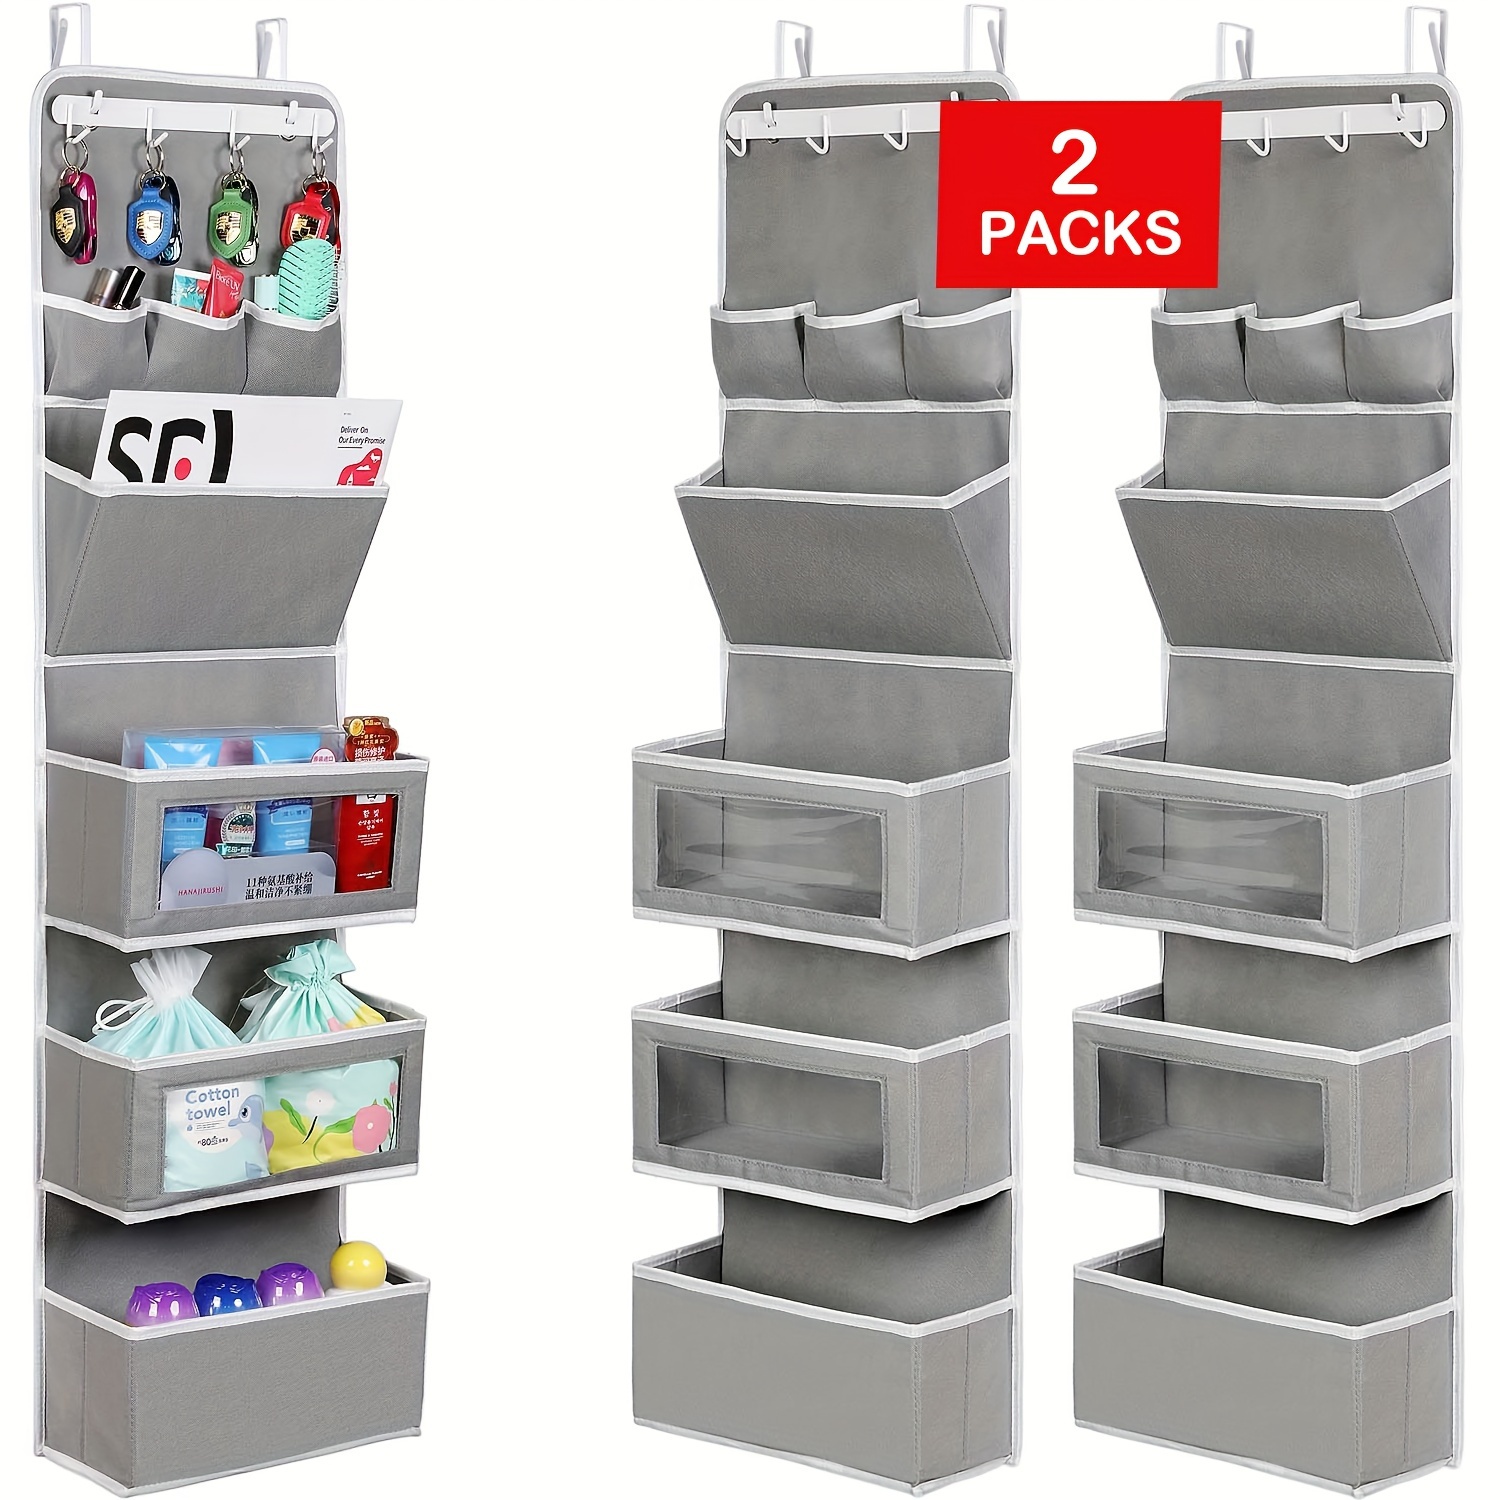 

2pcs/set All-in-one Over The Door Organizer, Super Behind The Door Storage Organizer With Door Rack And Large Clear Windows, Wall File Organizer, Hanging Organizer